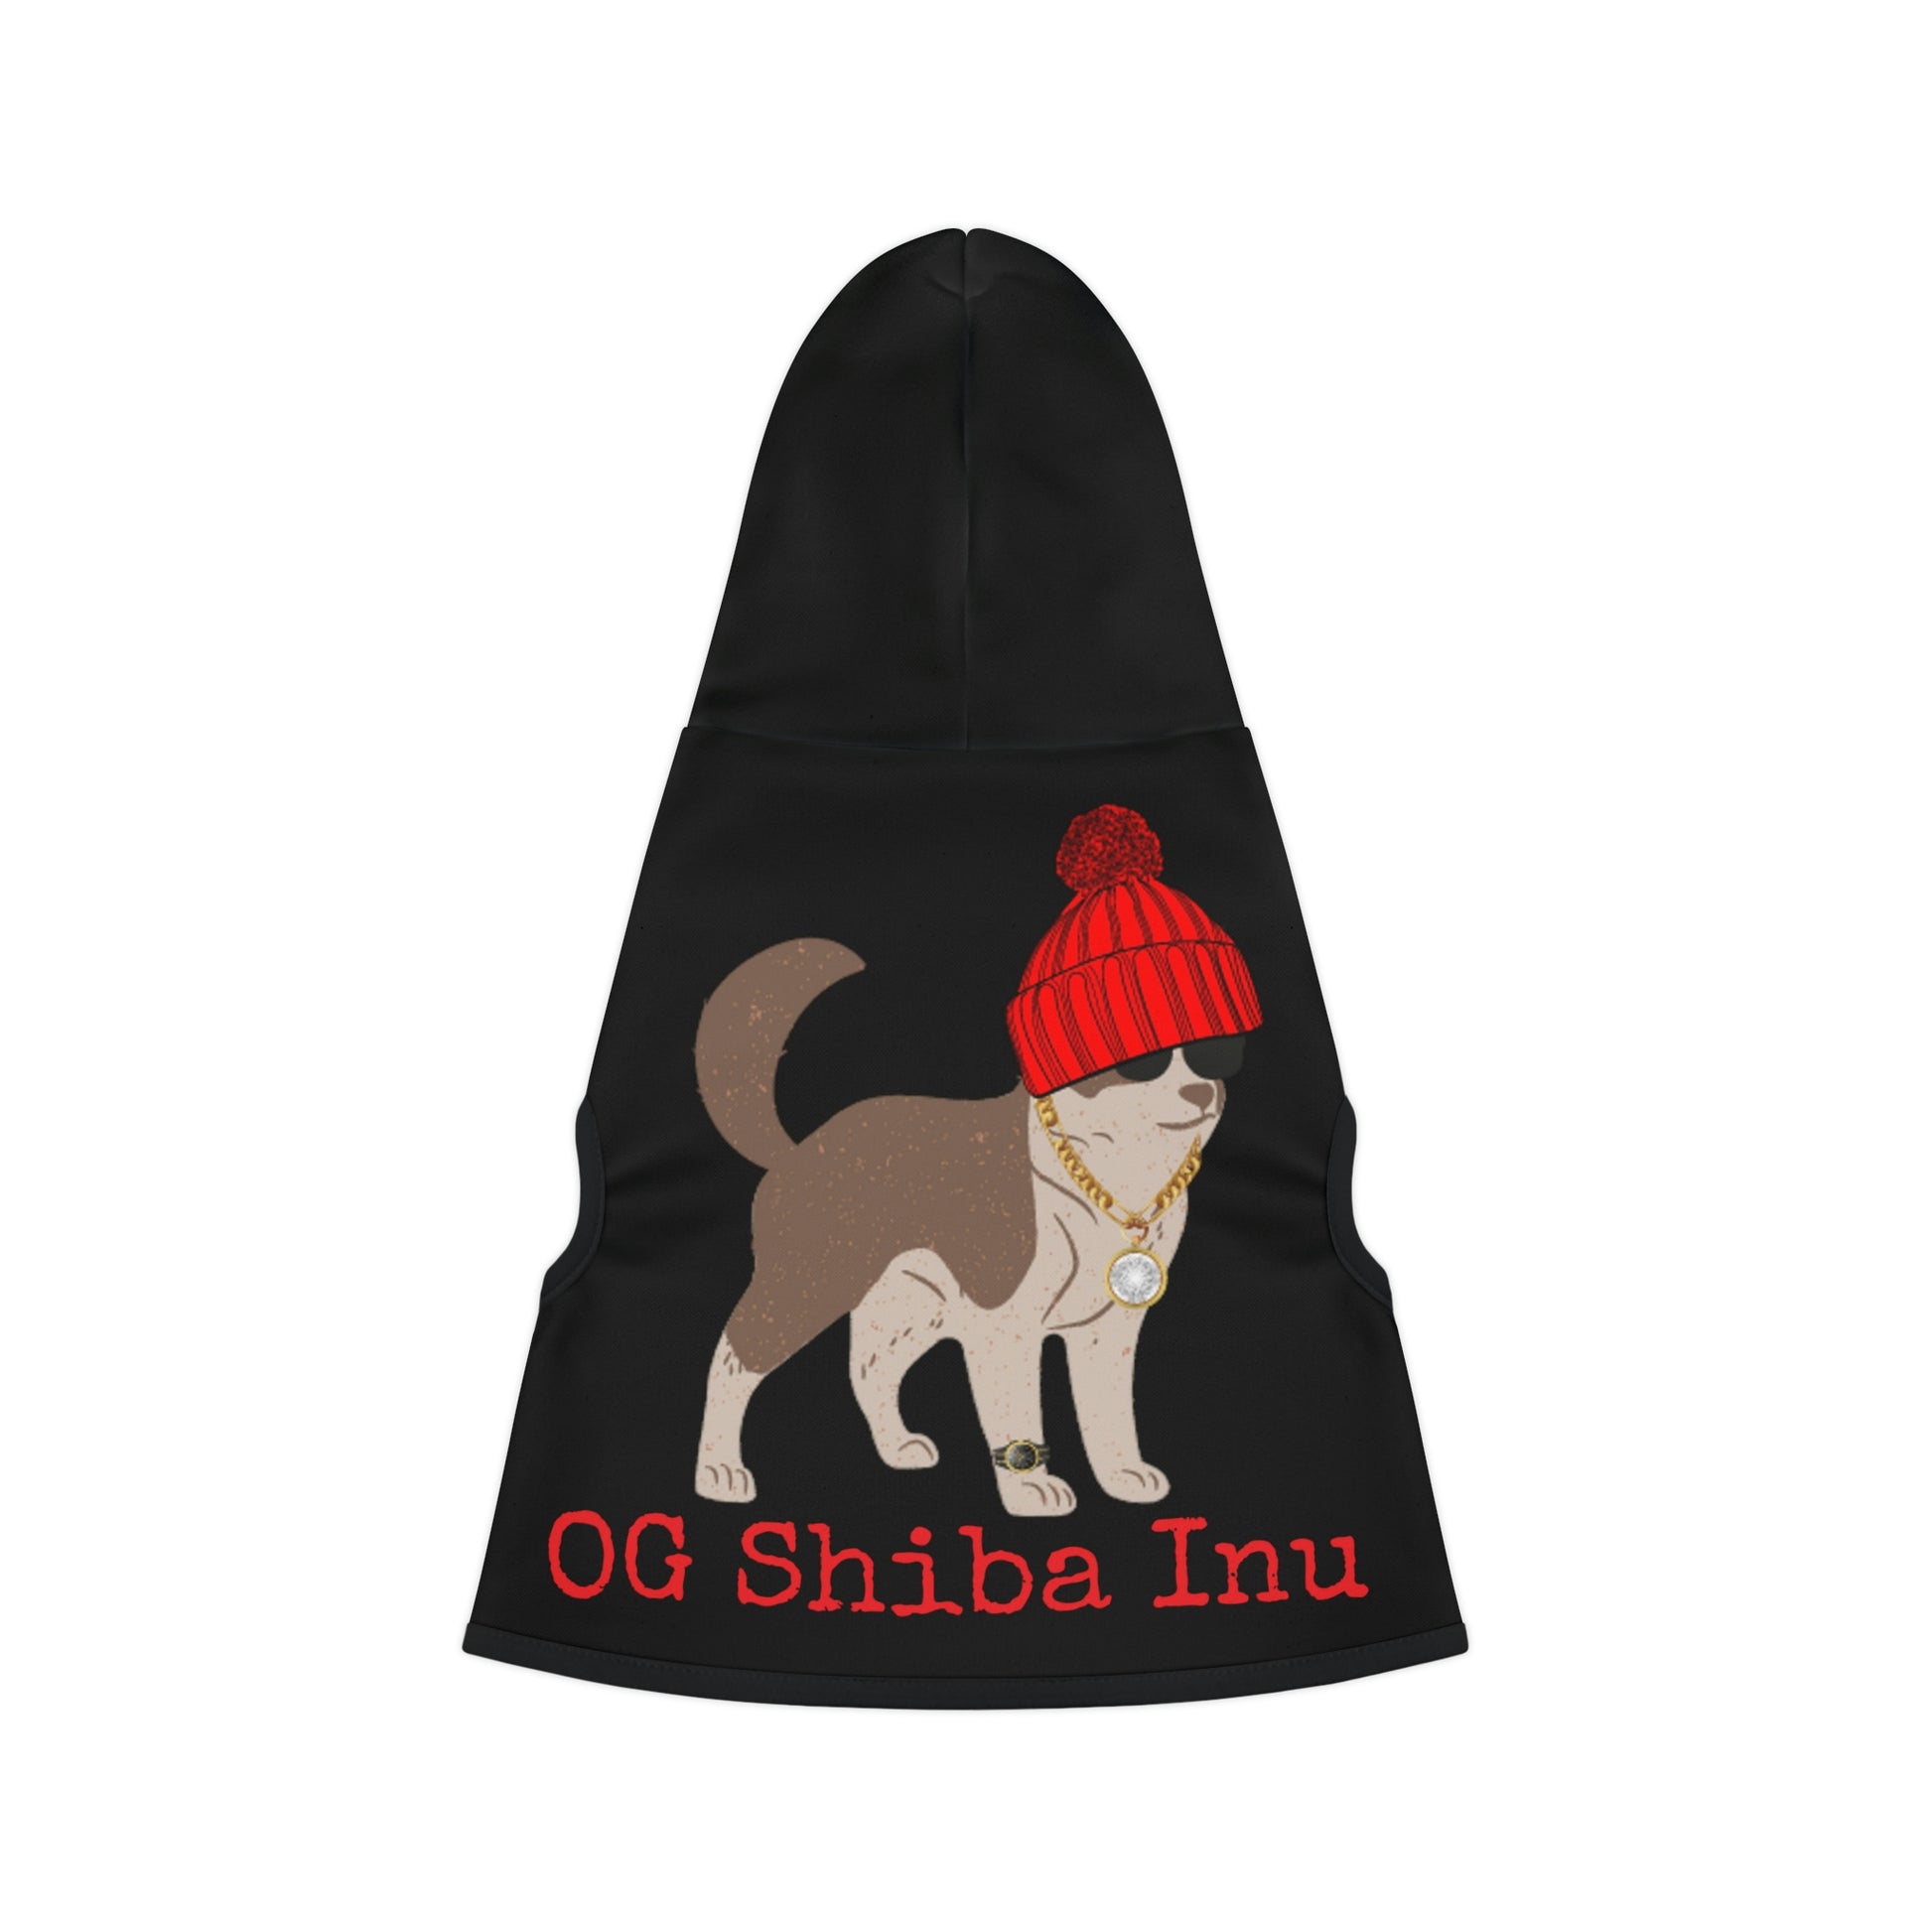 OG Shiba Inu Dog Hoodie | BKLA | Shoes & Accessories | shoes, hats, phone covers, tote bags, clutch bags